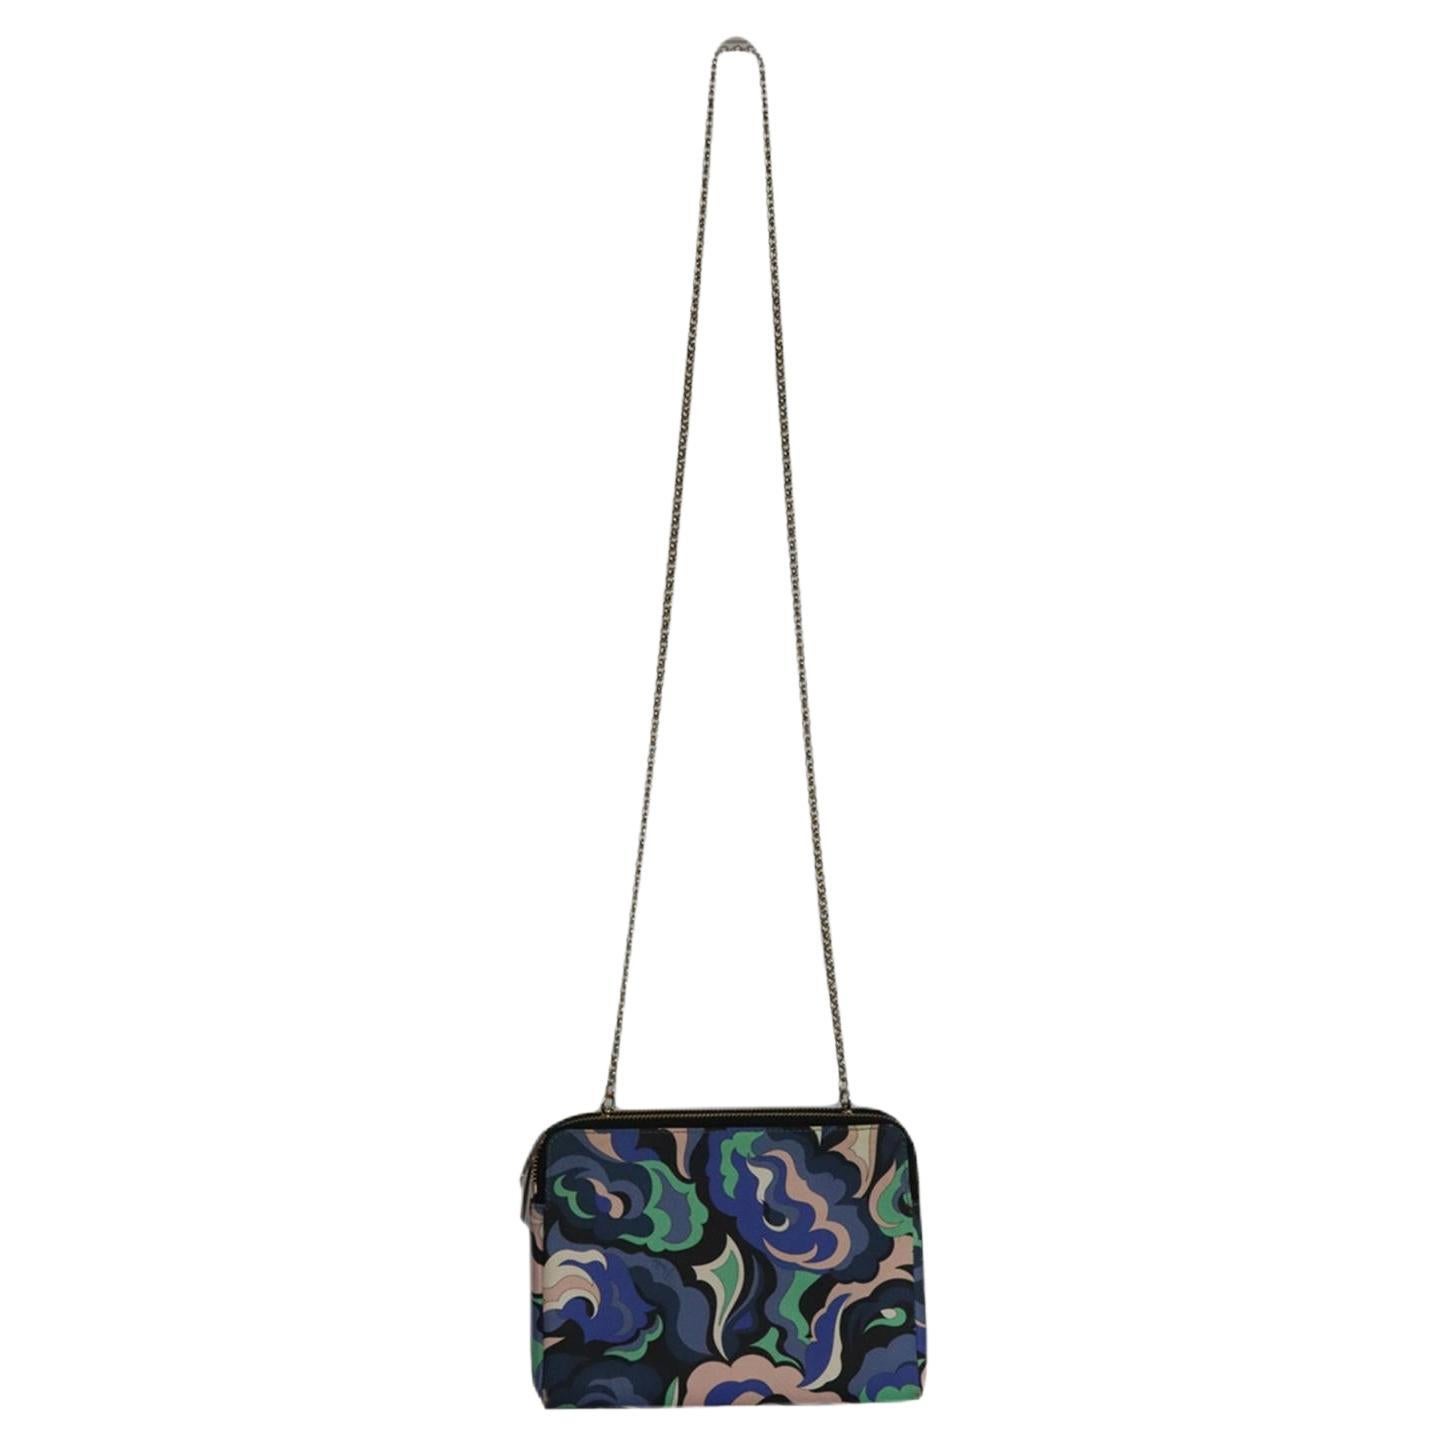 Emilio Pucci Two In One Printed Textured Leather Shoulder Bag